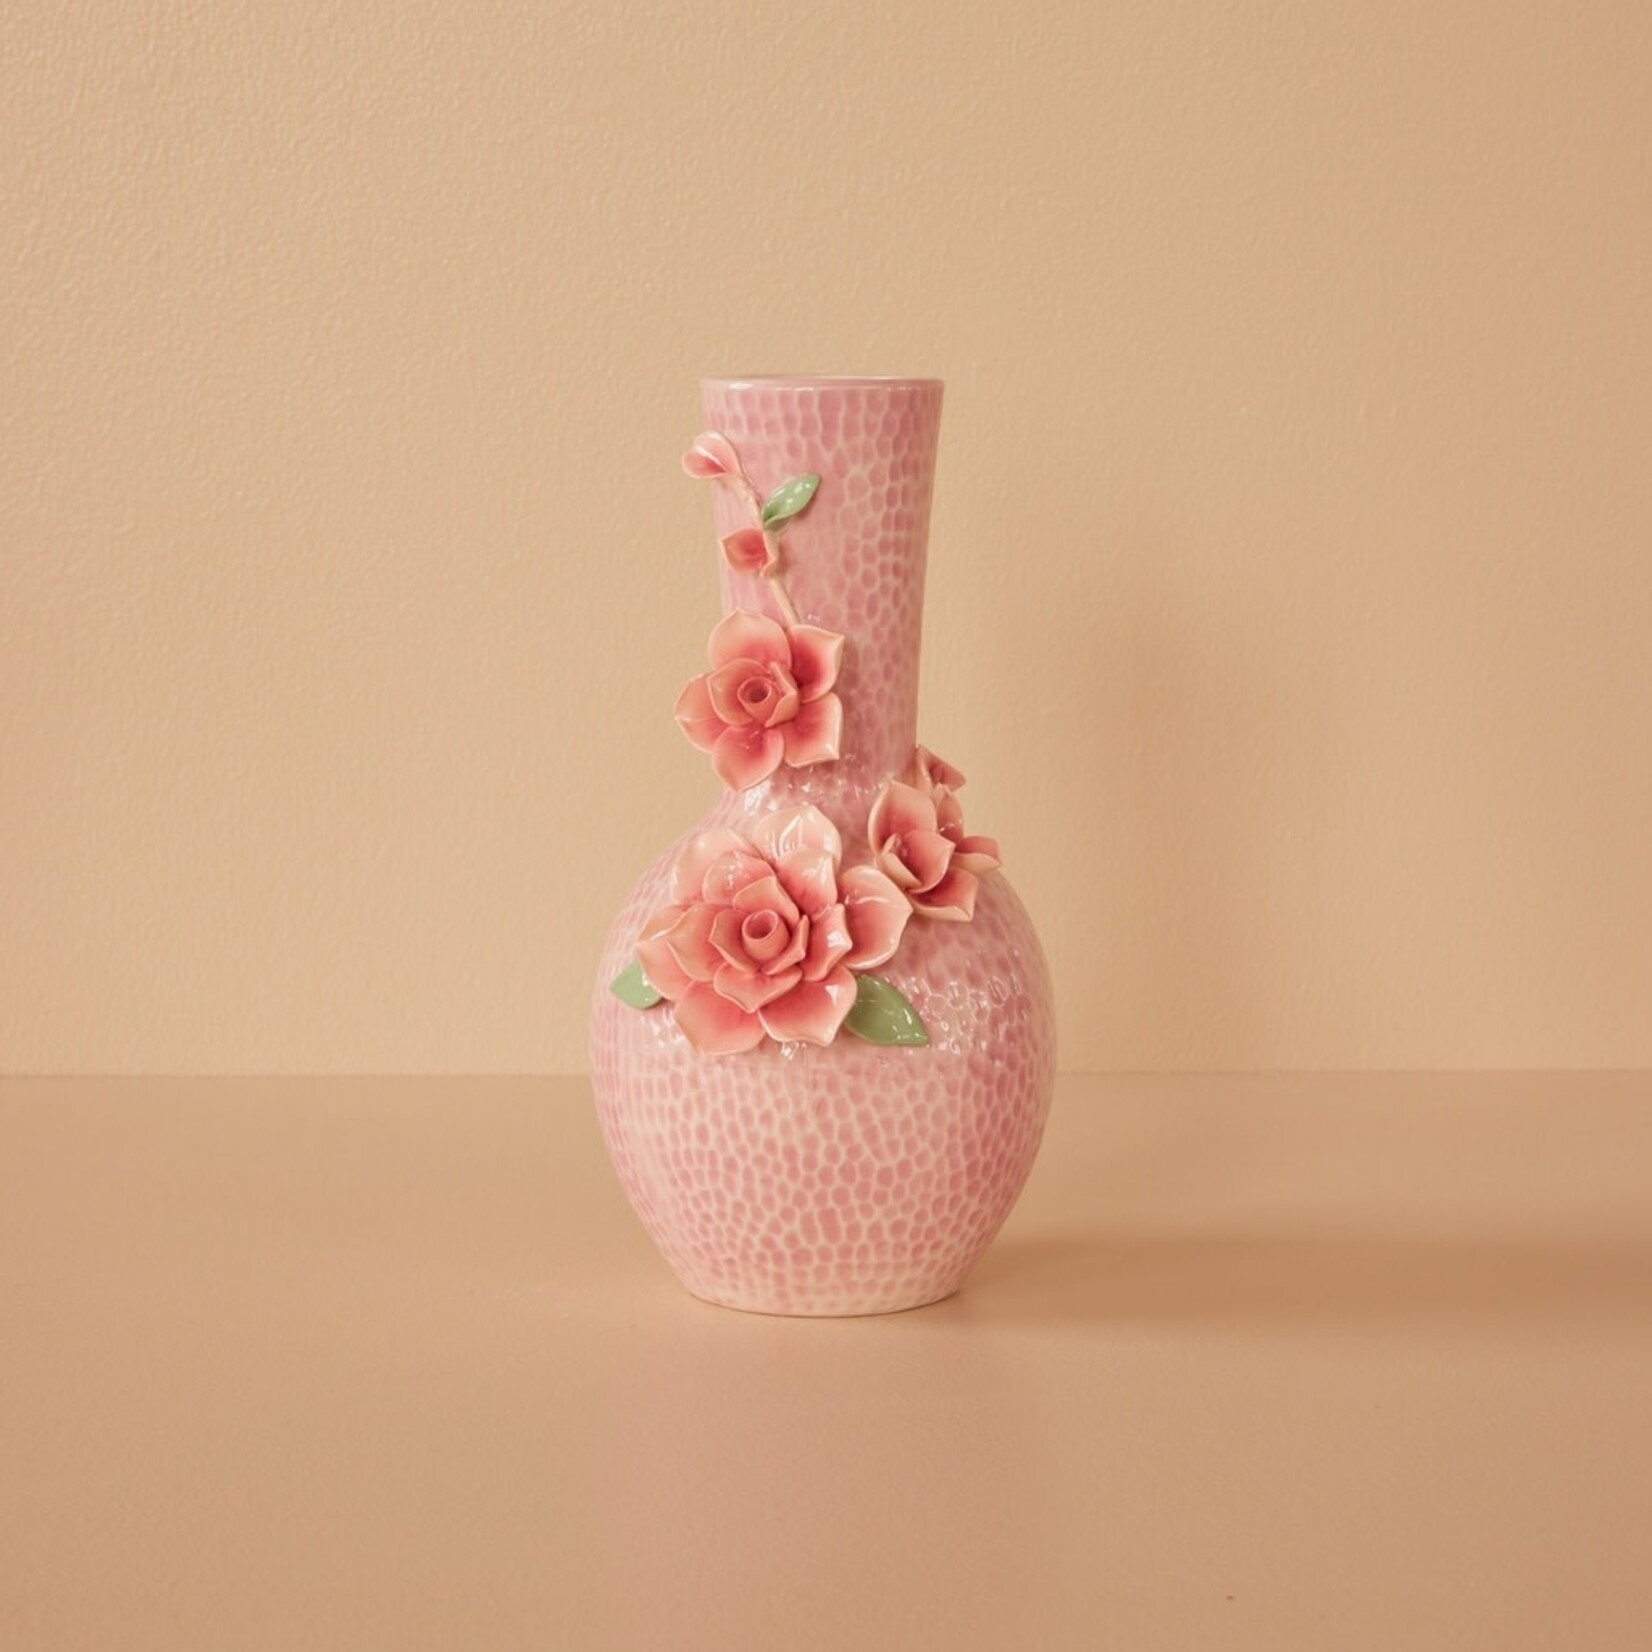 RICE RICE CERAMIC SMALL VASE WITH FLOWER SCULPTURE PINK